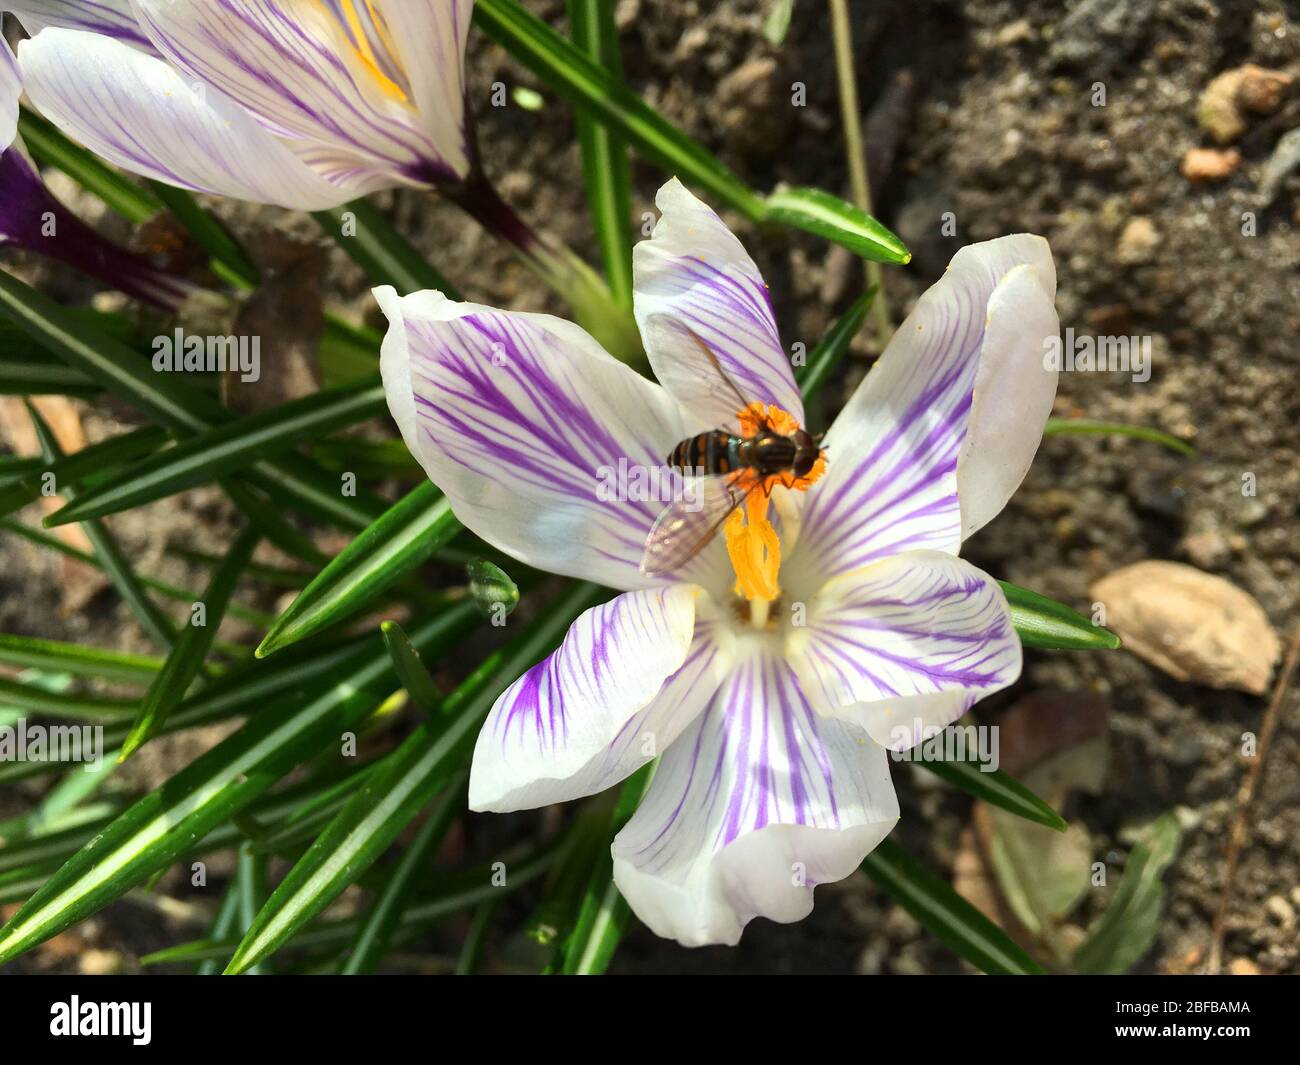 Bee on a flower Crocus vernus, collecting nectar, springtime background. Pollination Royalty Free Stock image Stock Photo